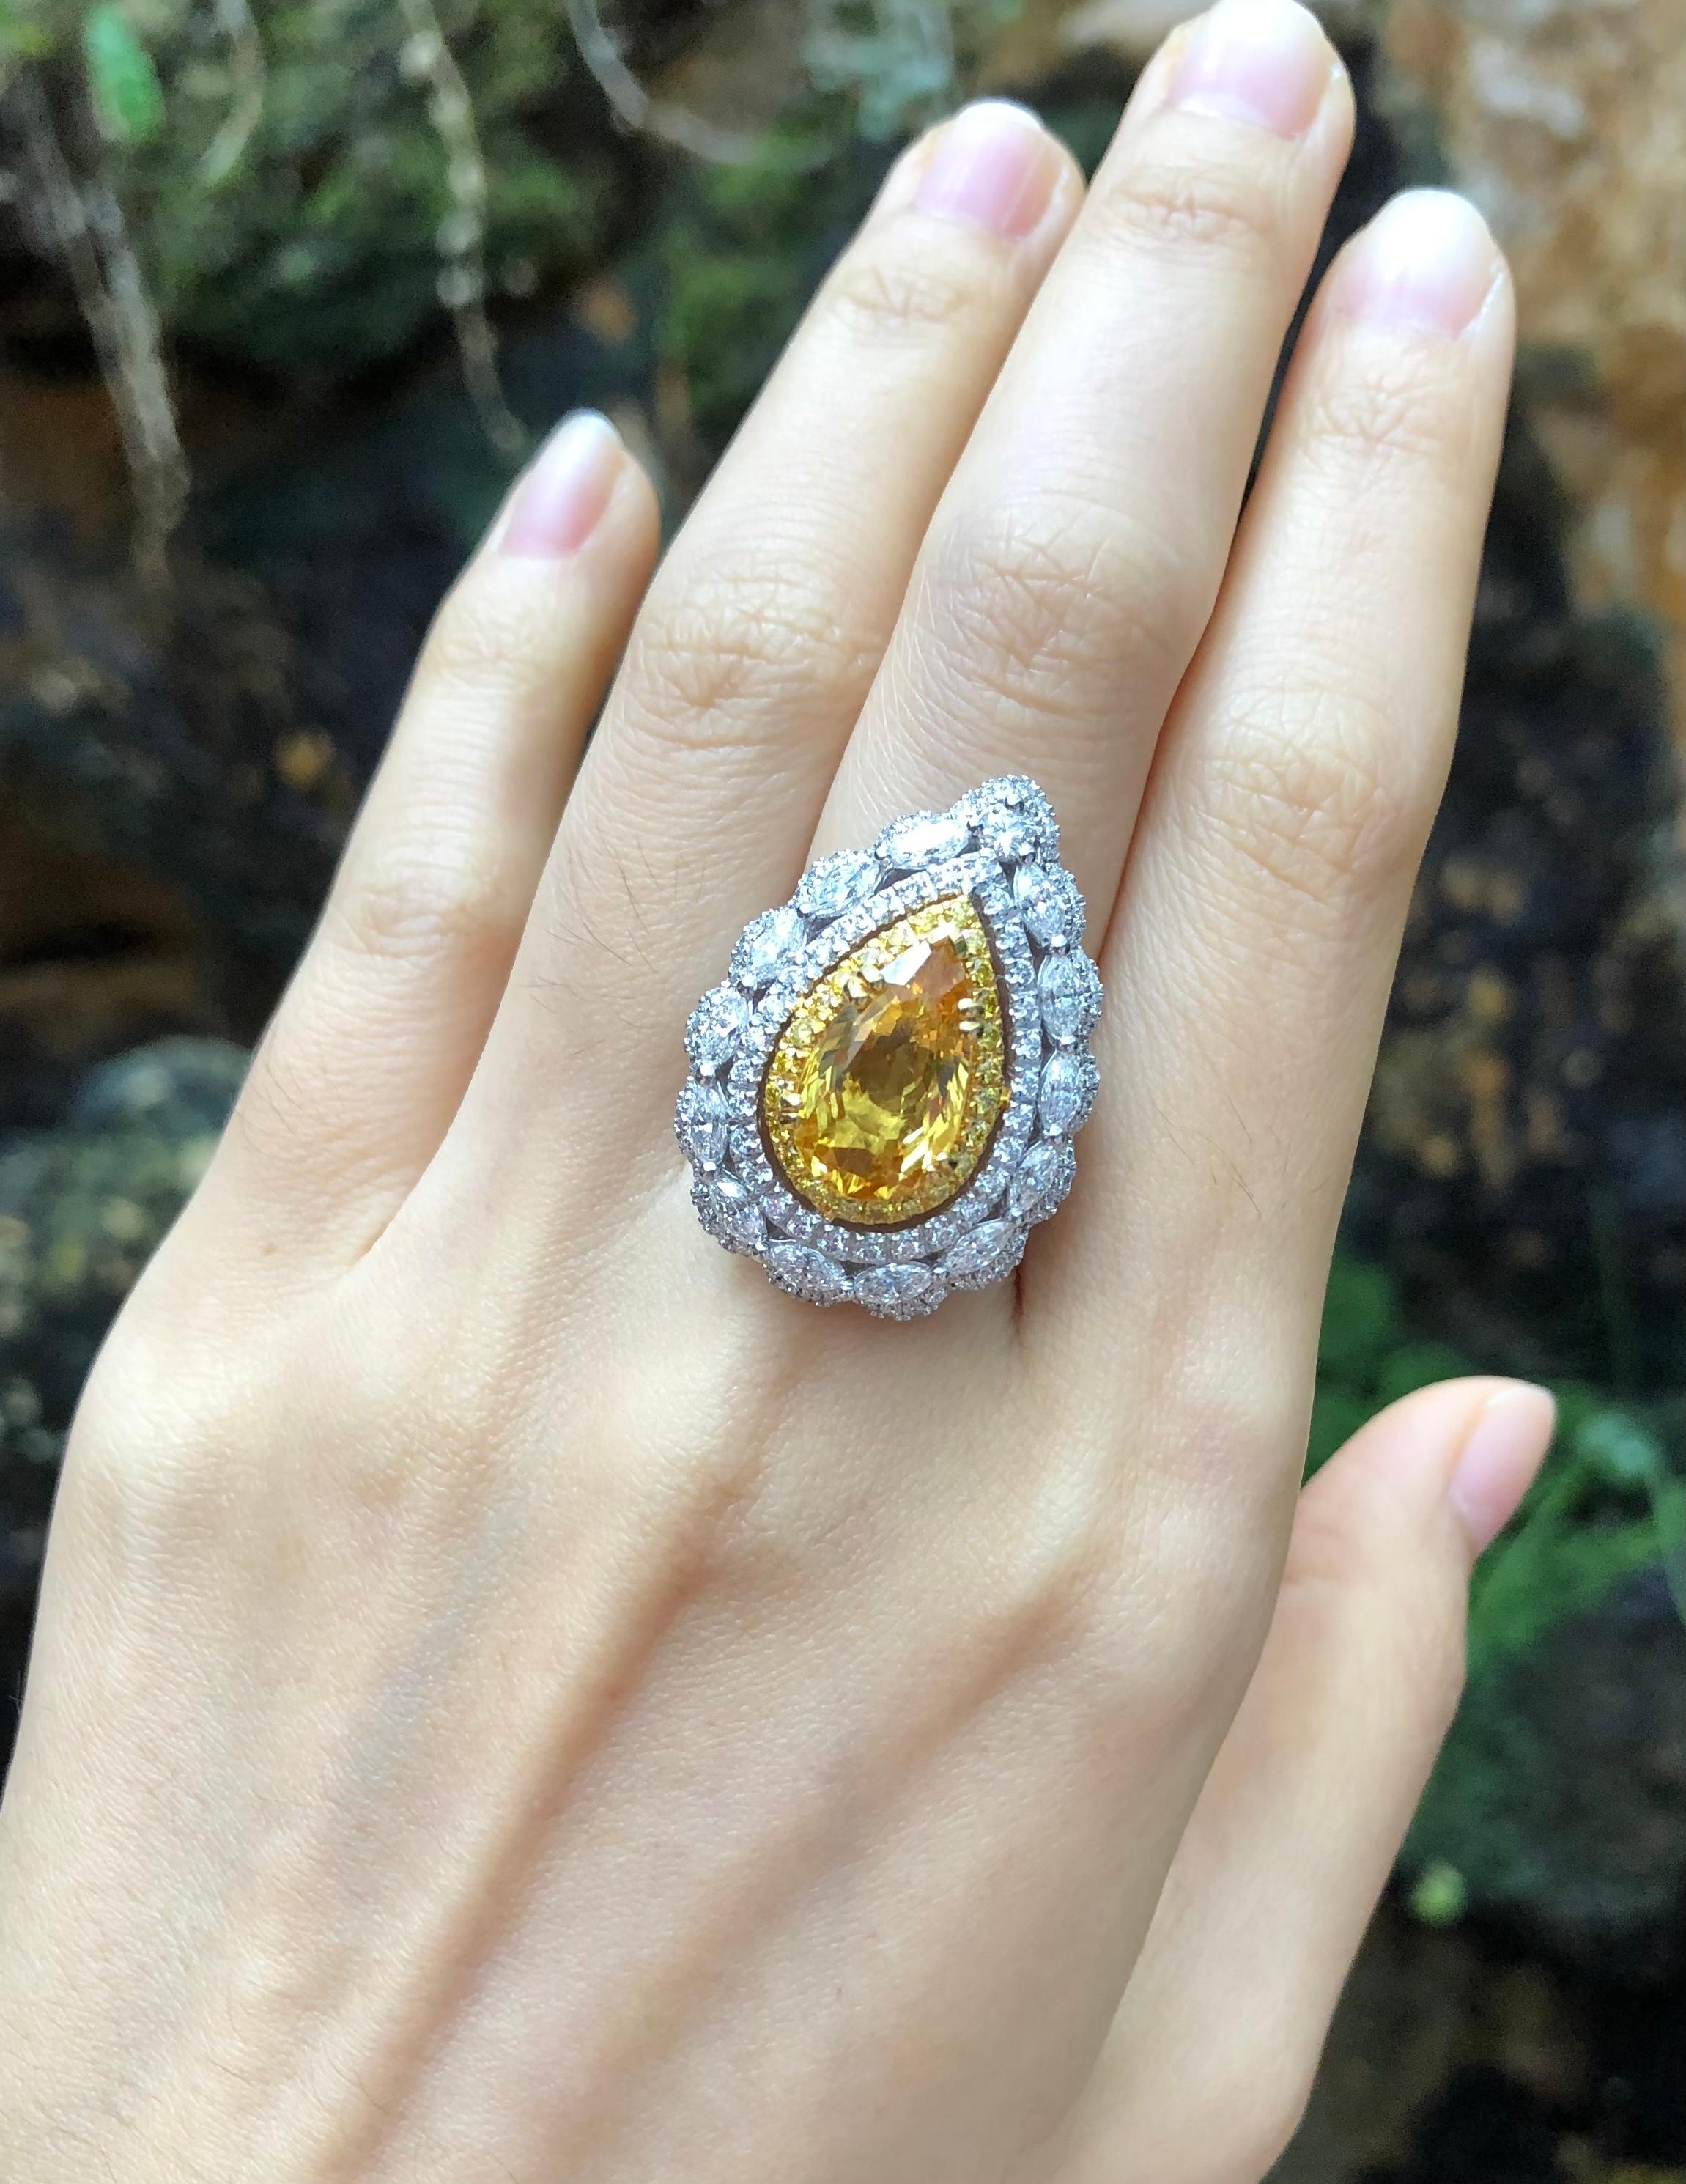 how much is a 3.72-carat yellow diamond worth